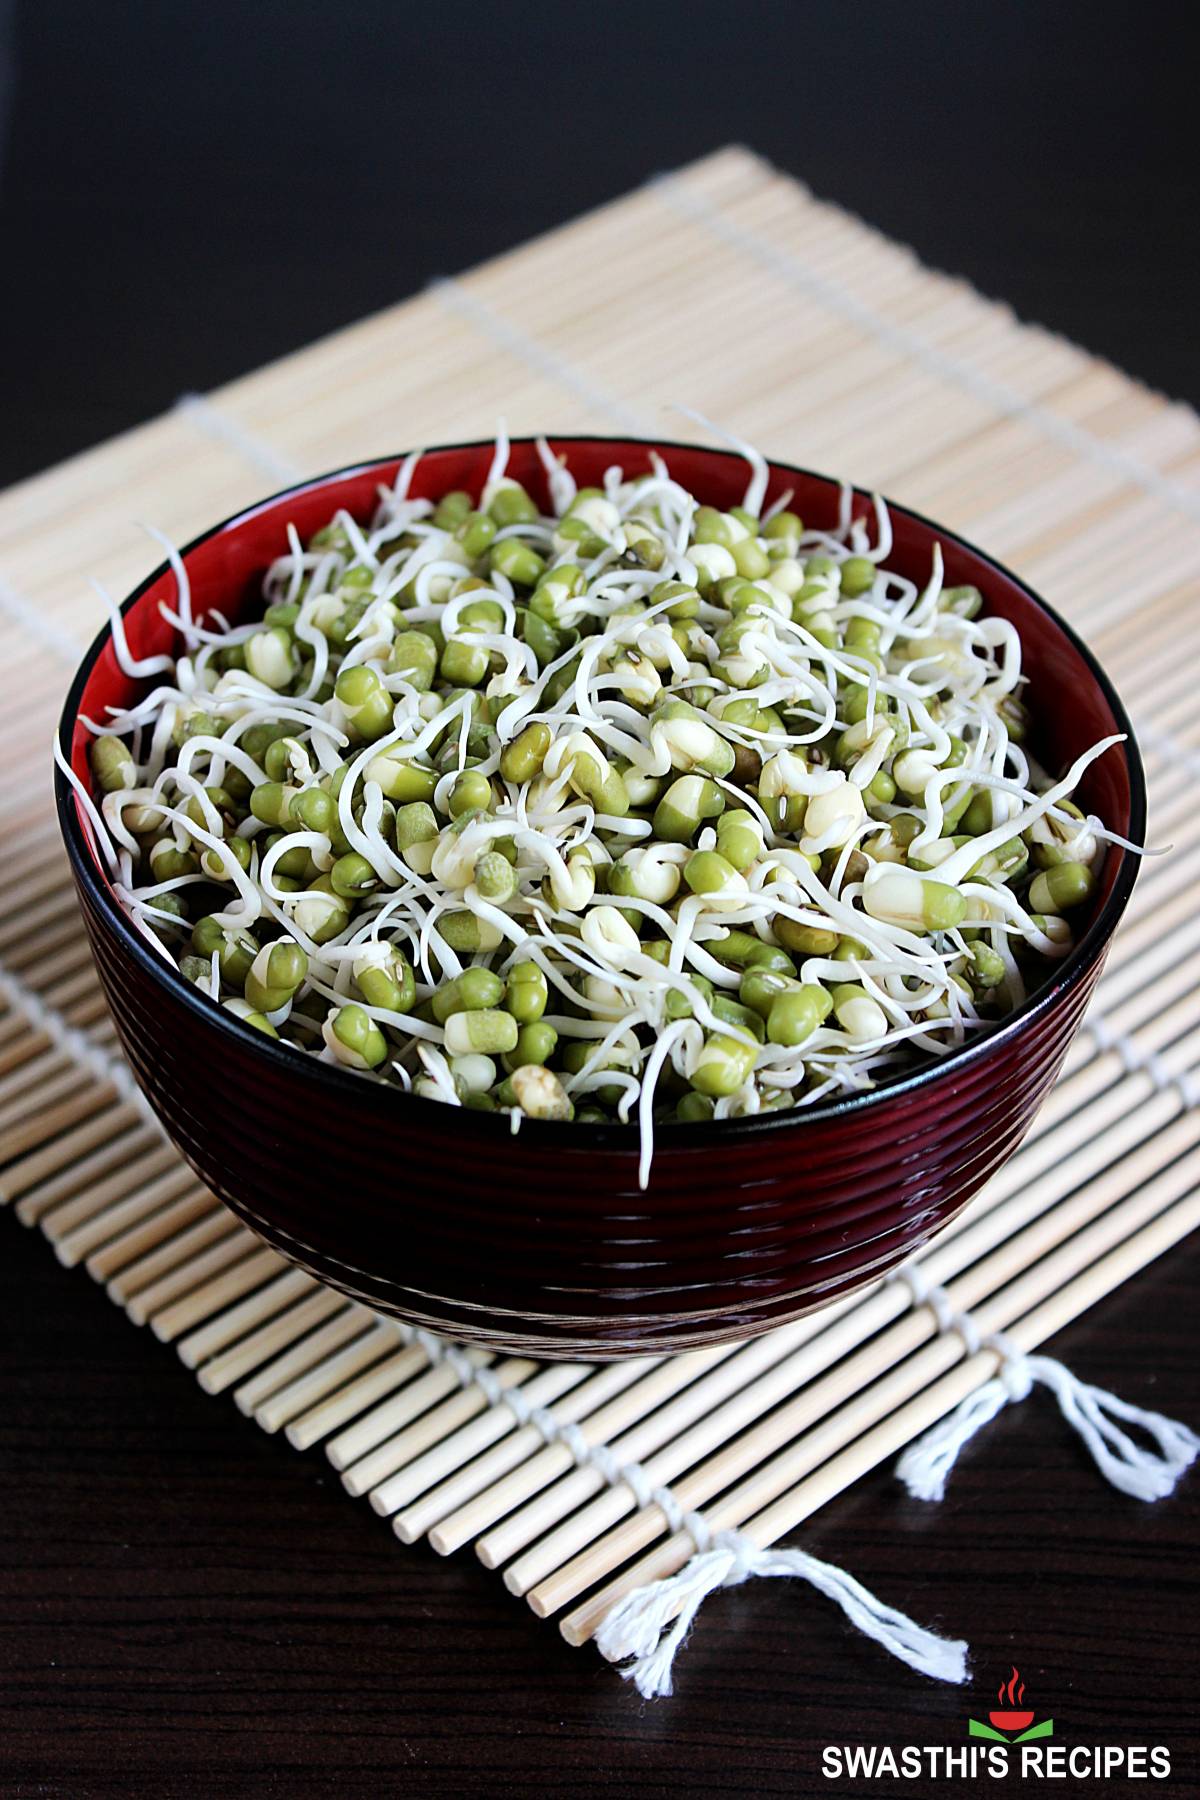 bouwer Uitsluiting regering Mung Bean Sprouts, How to Sprout Mung Beans